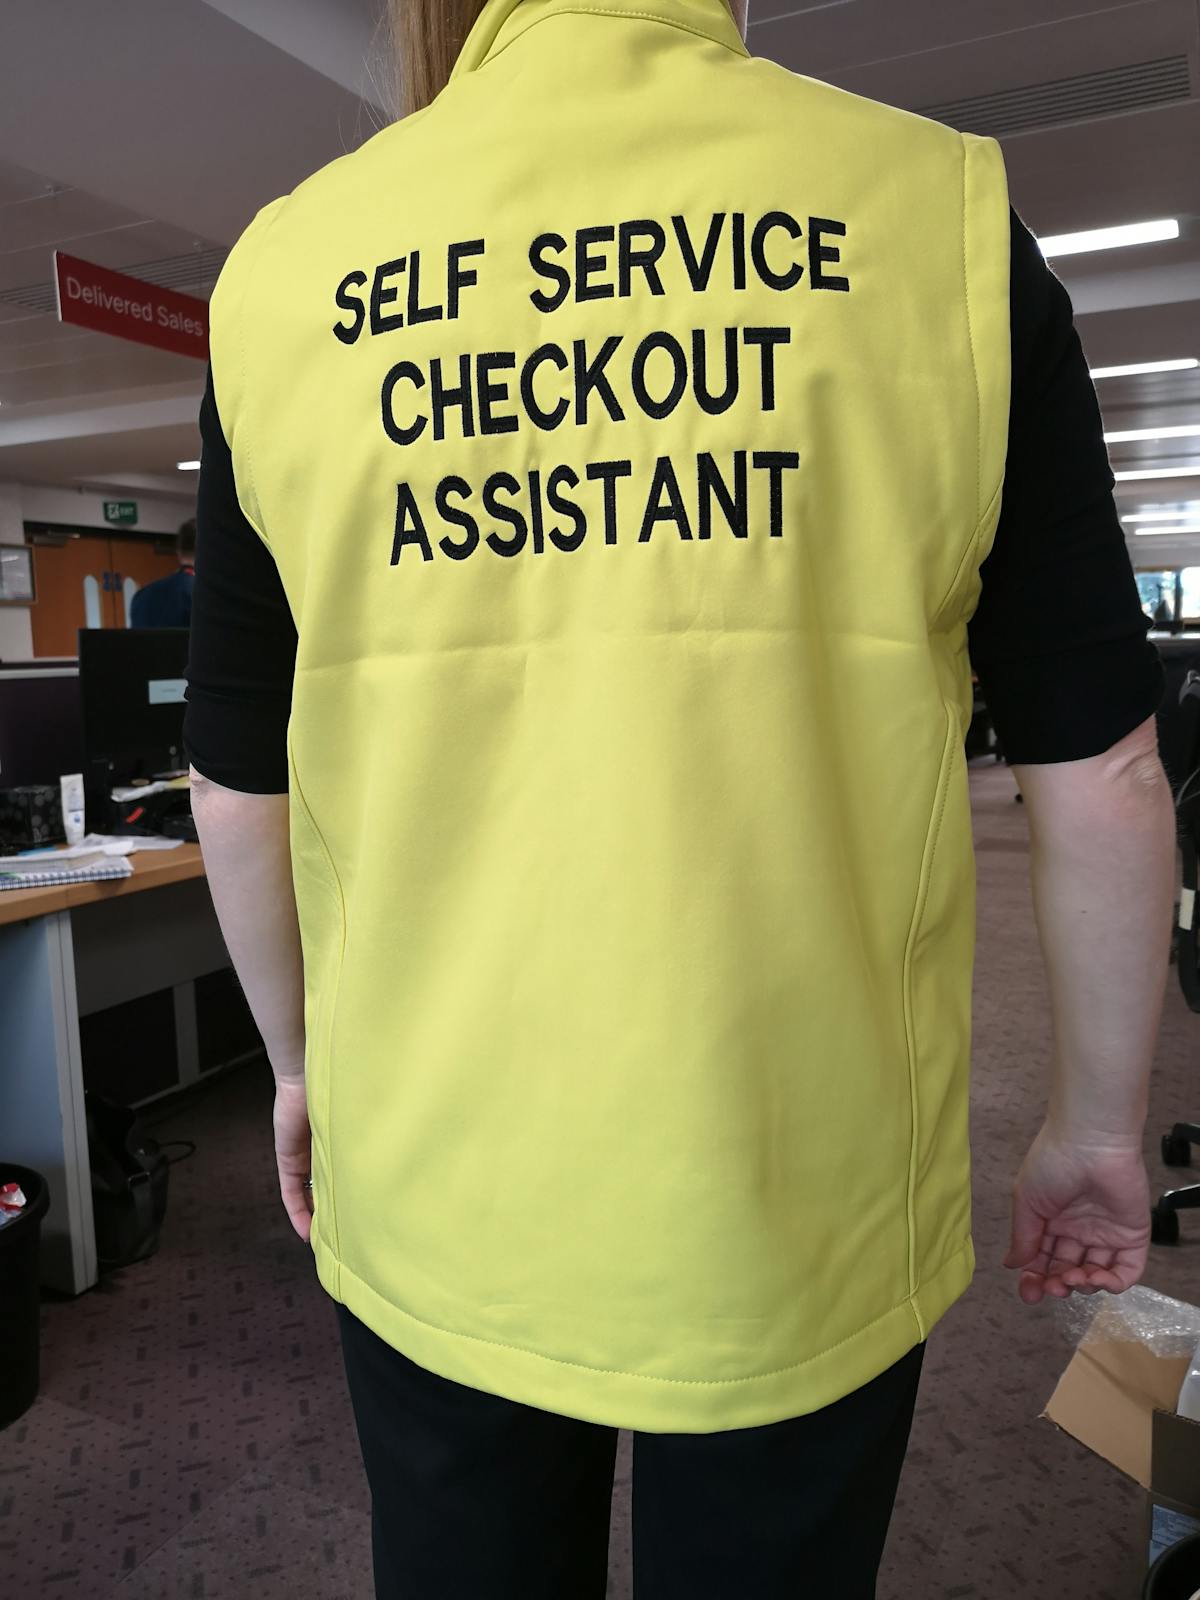 Webinar - New Research on Self-Checkout Supervisors